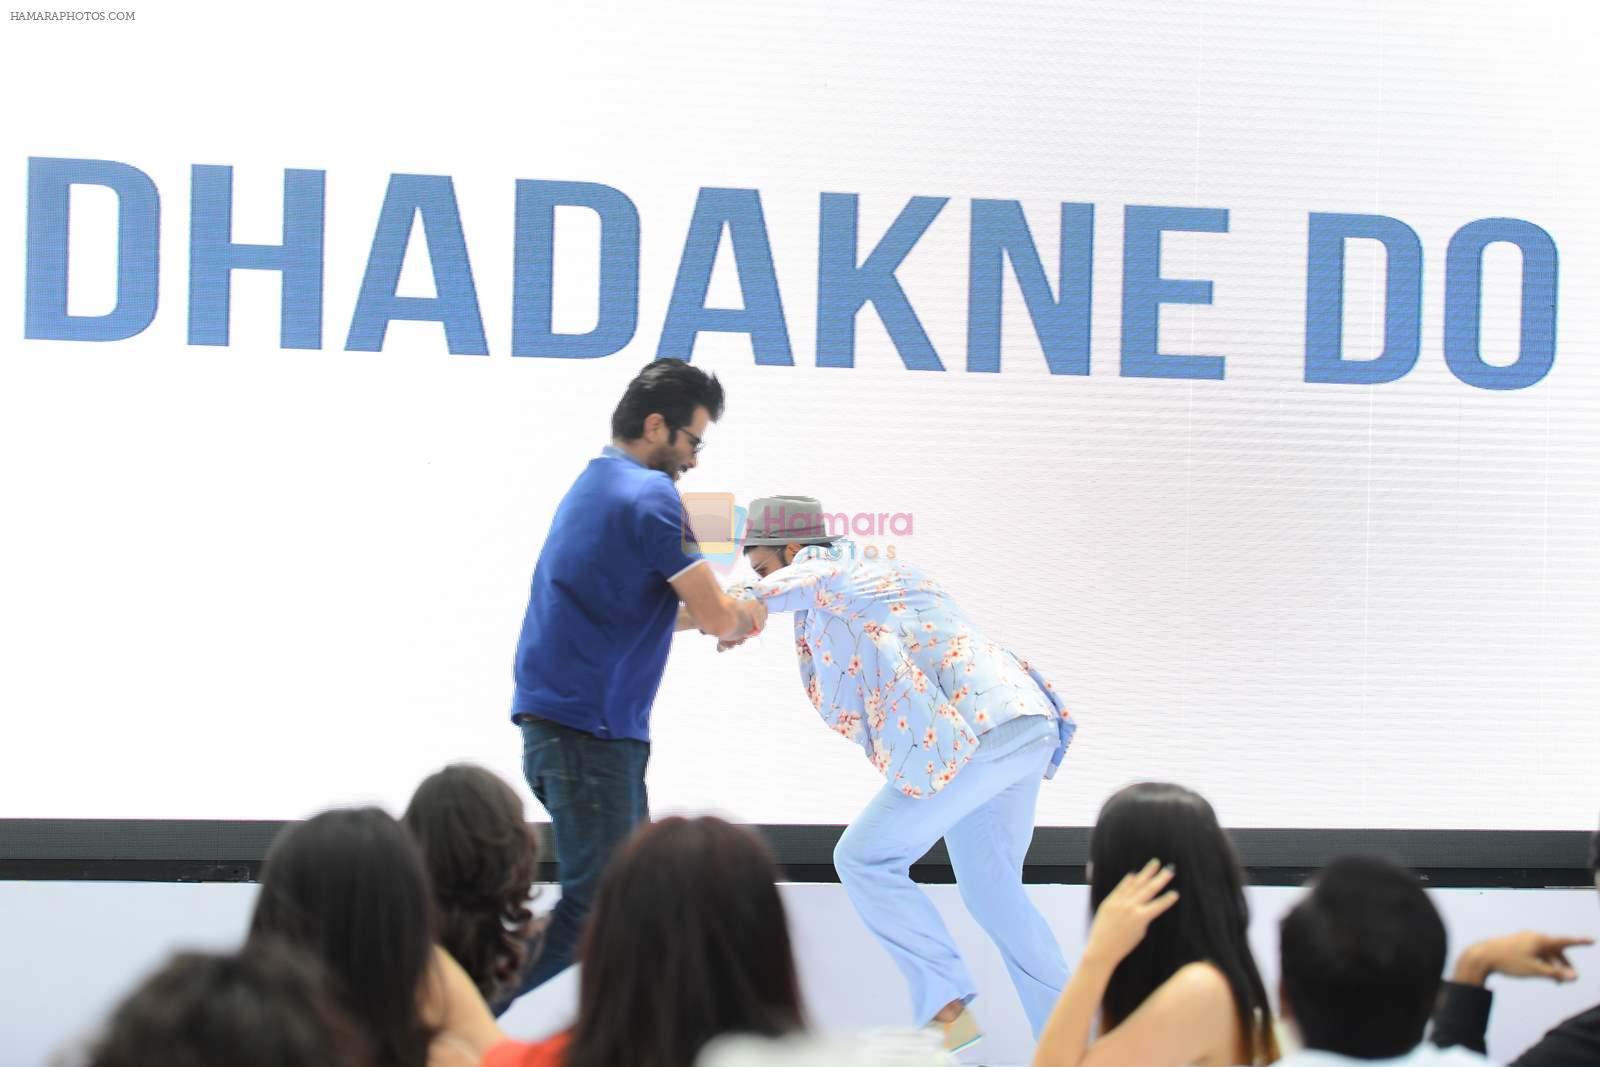 Anil Kapoor, Ranveer Singh at Dil Dhadakne Do music launch in Mumbai on 3rd May 2015